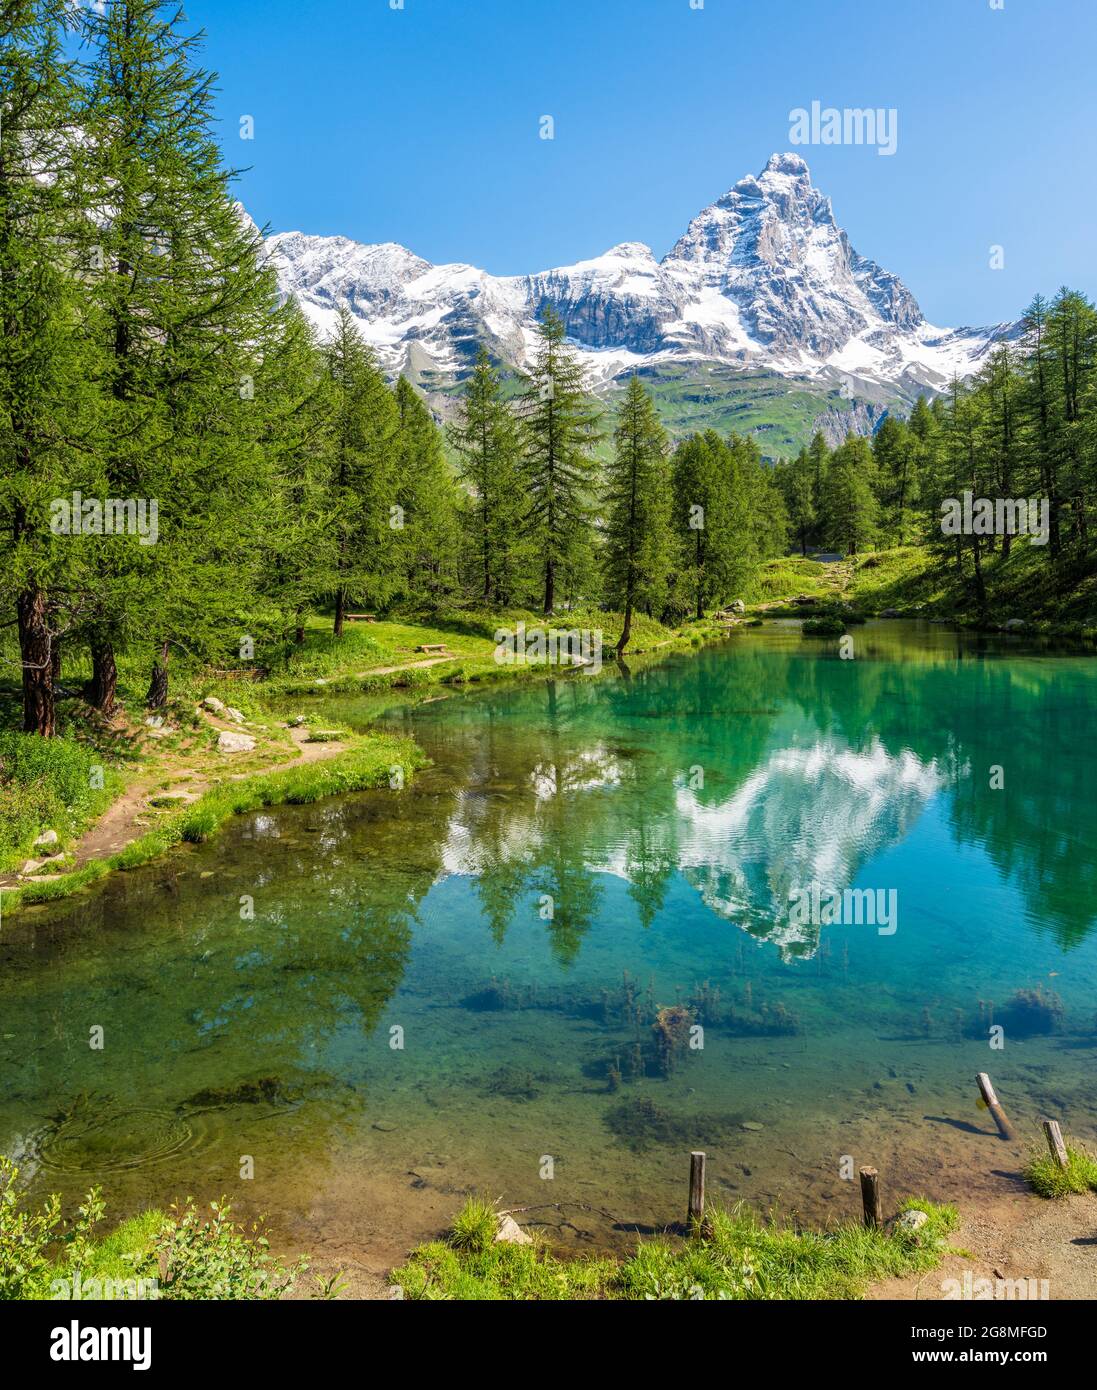 Idyllic morning view at the Blue Lake with the Matterhorn reflecting on the water, Valtournenche, Aosta Valley, Italy. Stock Photo